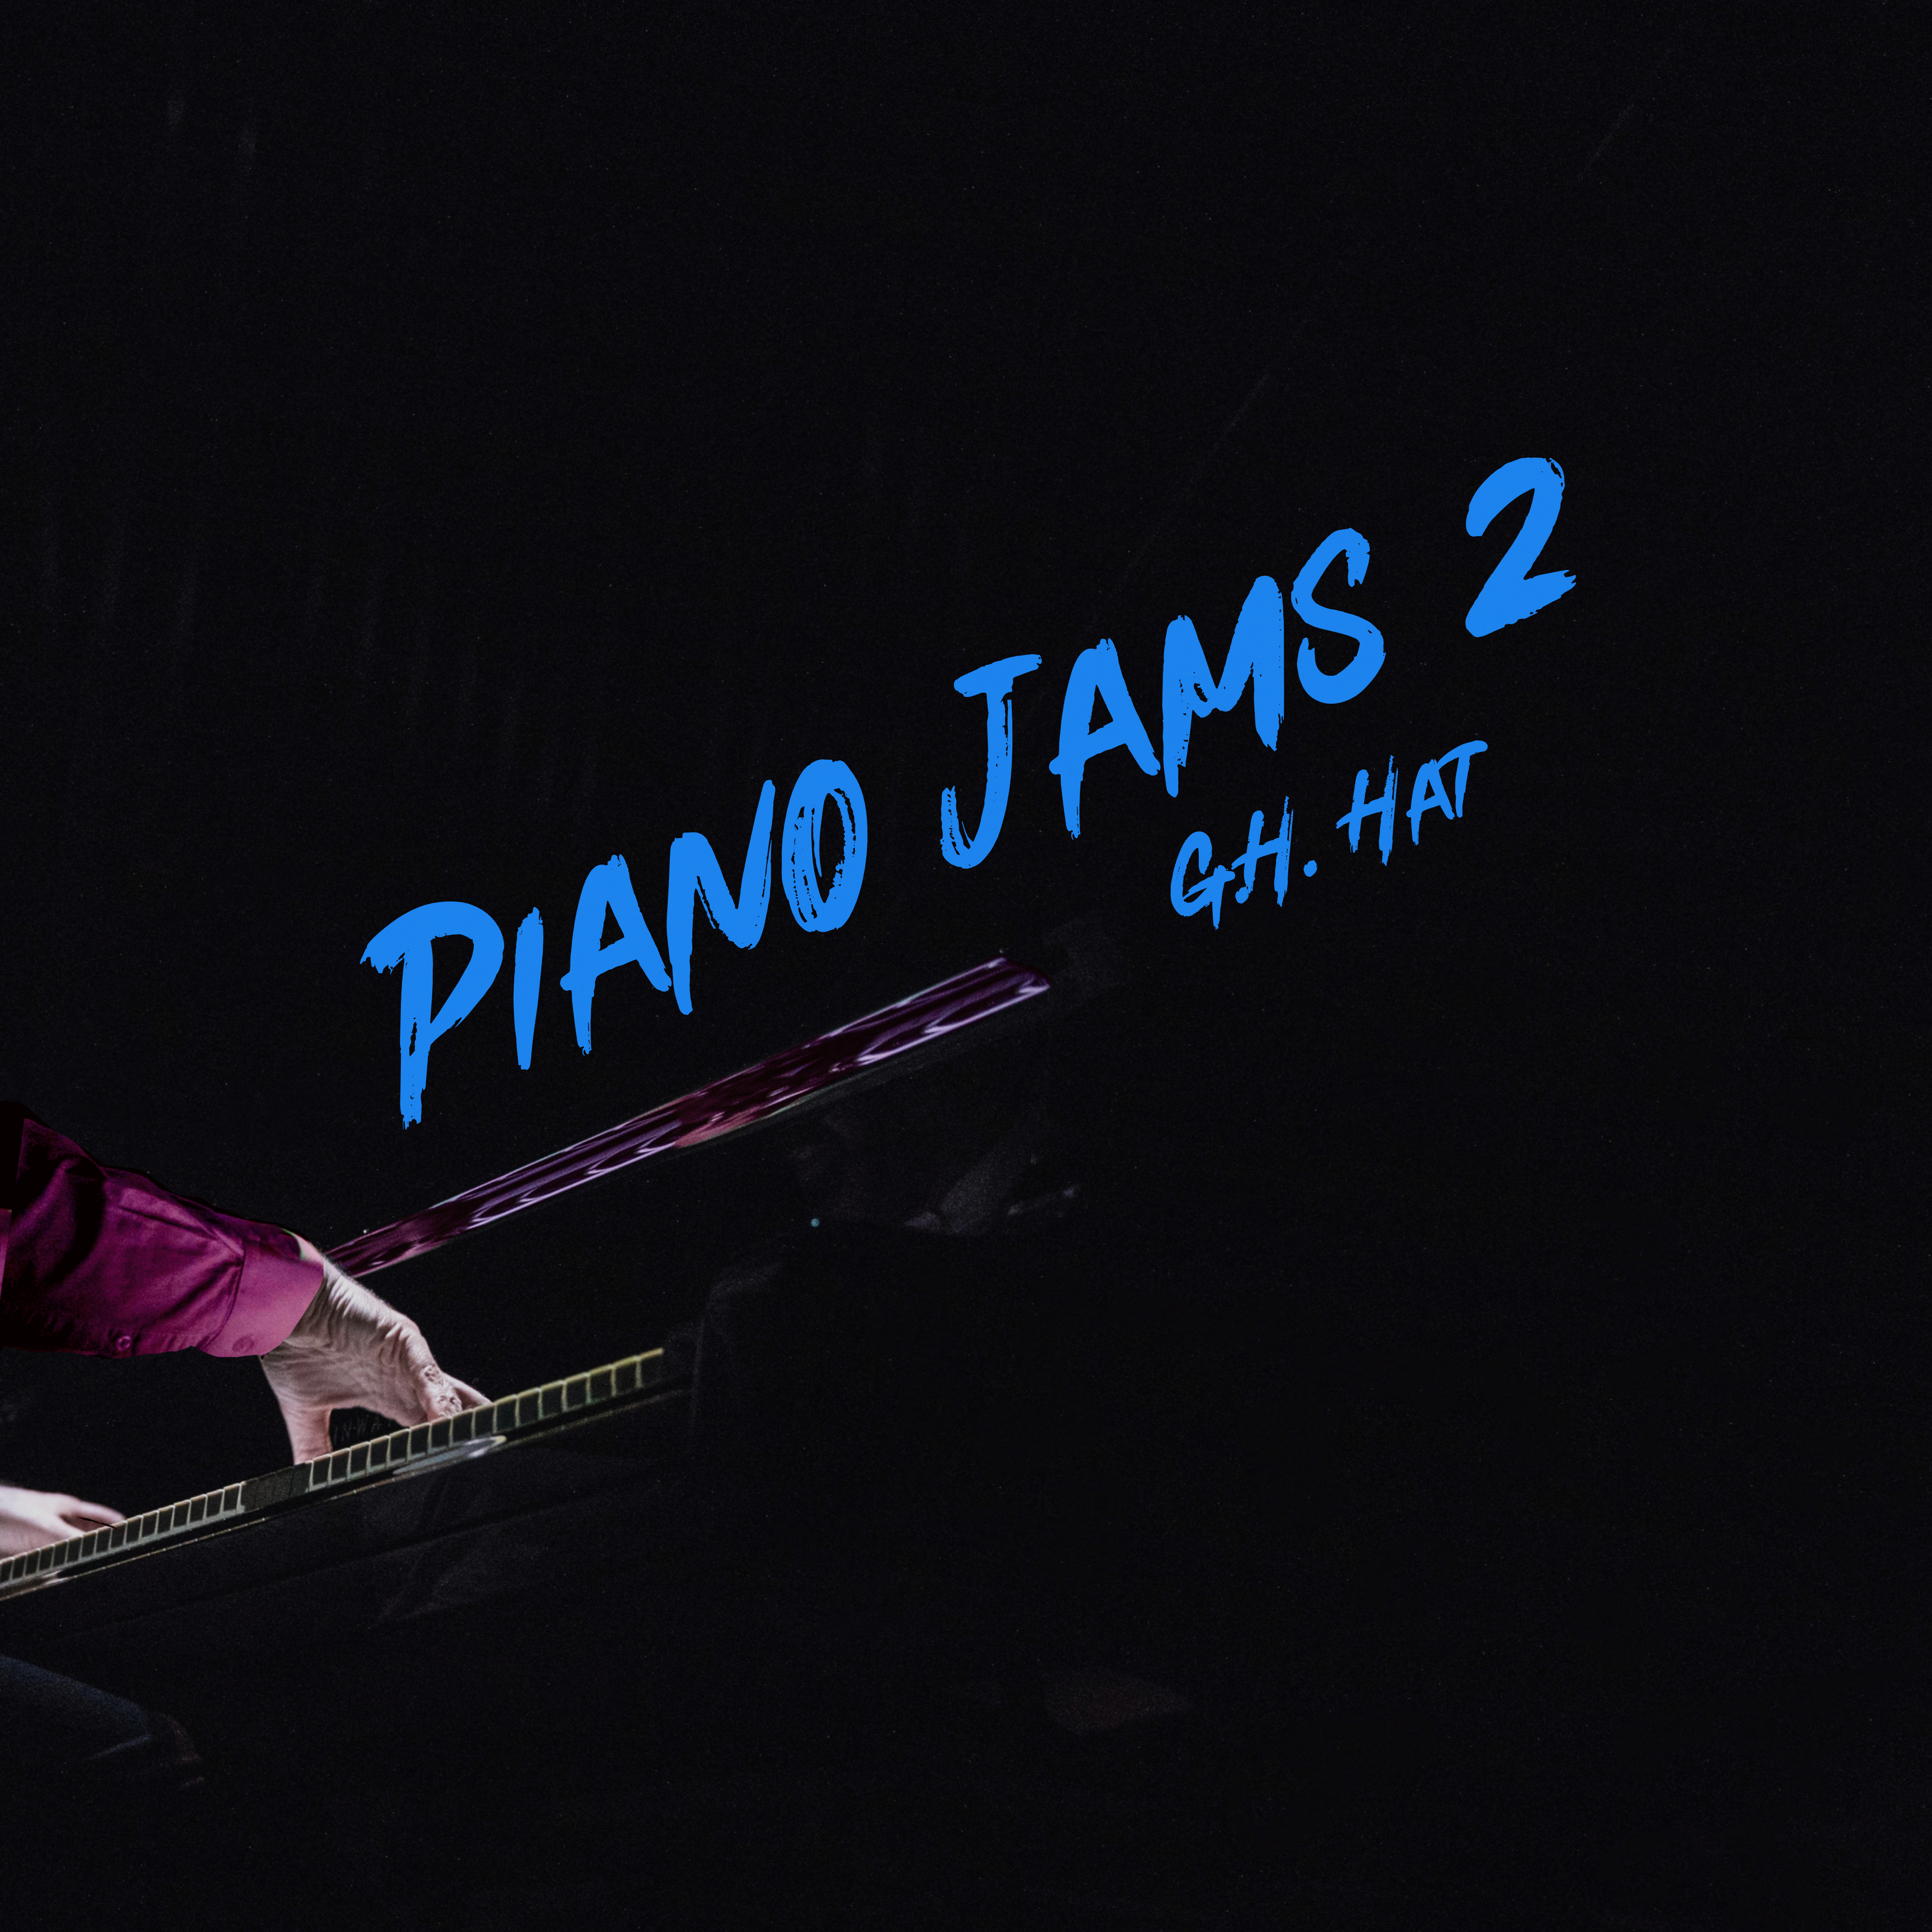 G.H. Hat’s “Piano Jams 2” Rises To #5 on Billboard’s Classical Crossover Albums